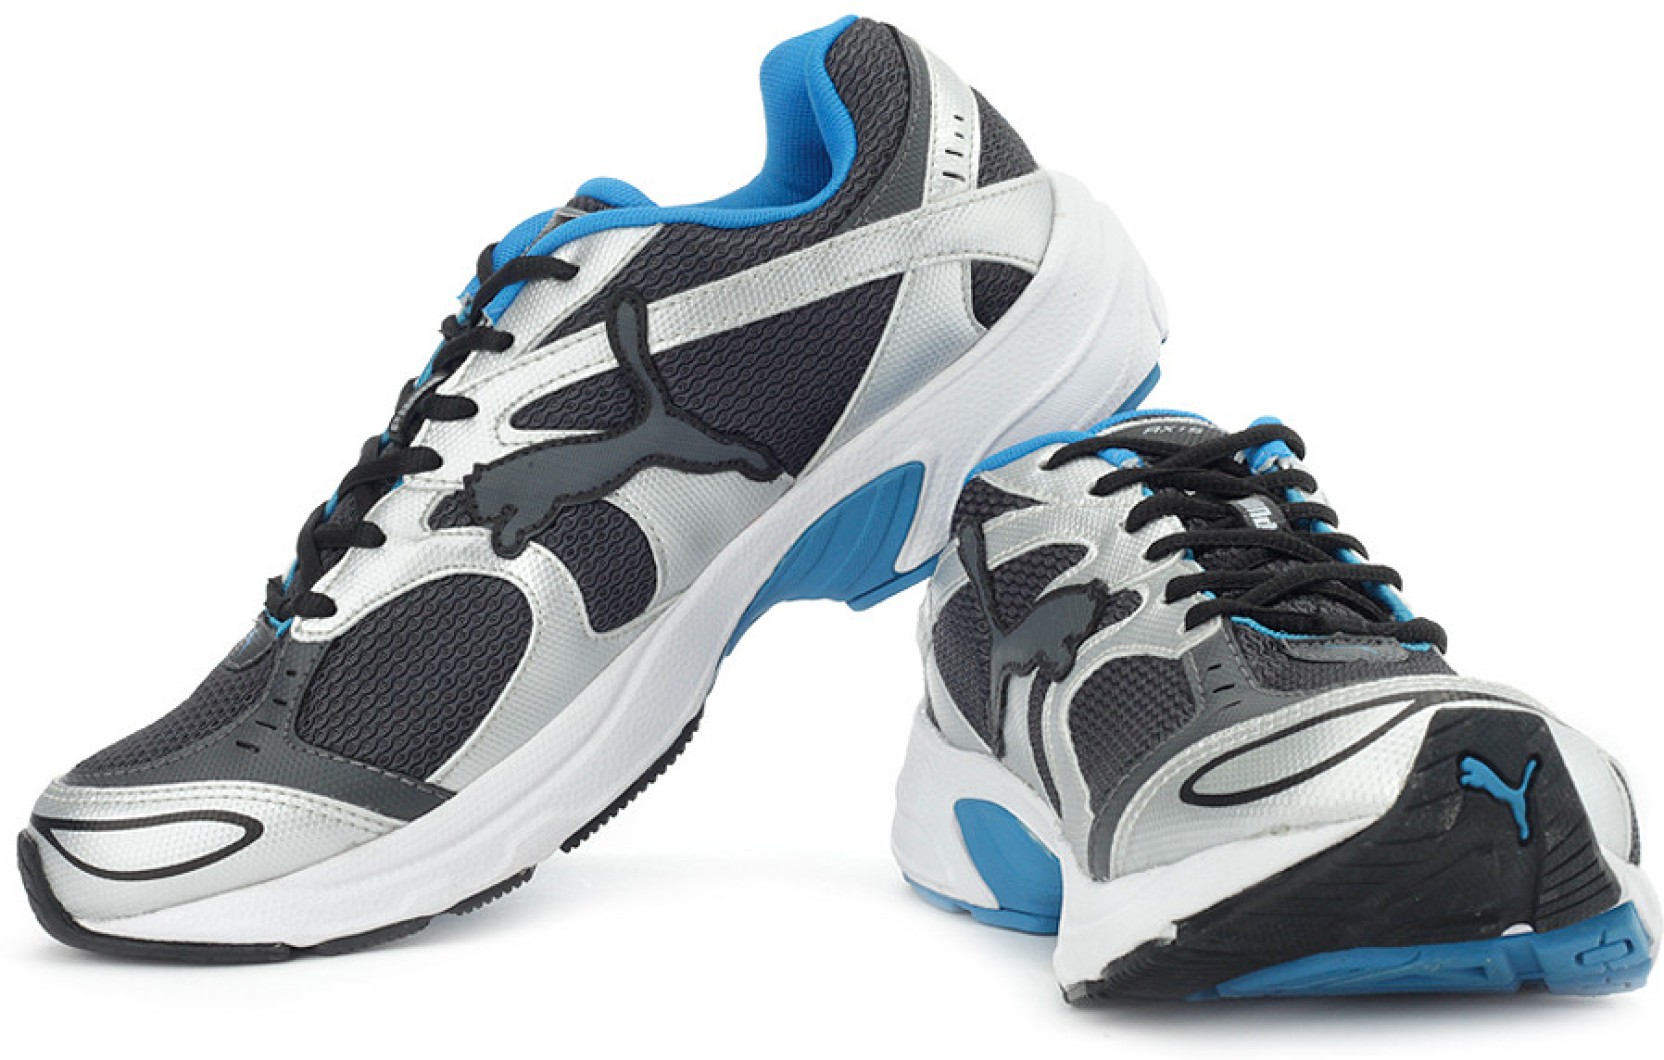 Puma Axis II Running Shoes - Buy Black, Puma Silver, Blue Aster Color ...